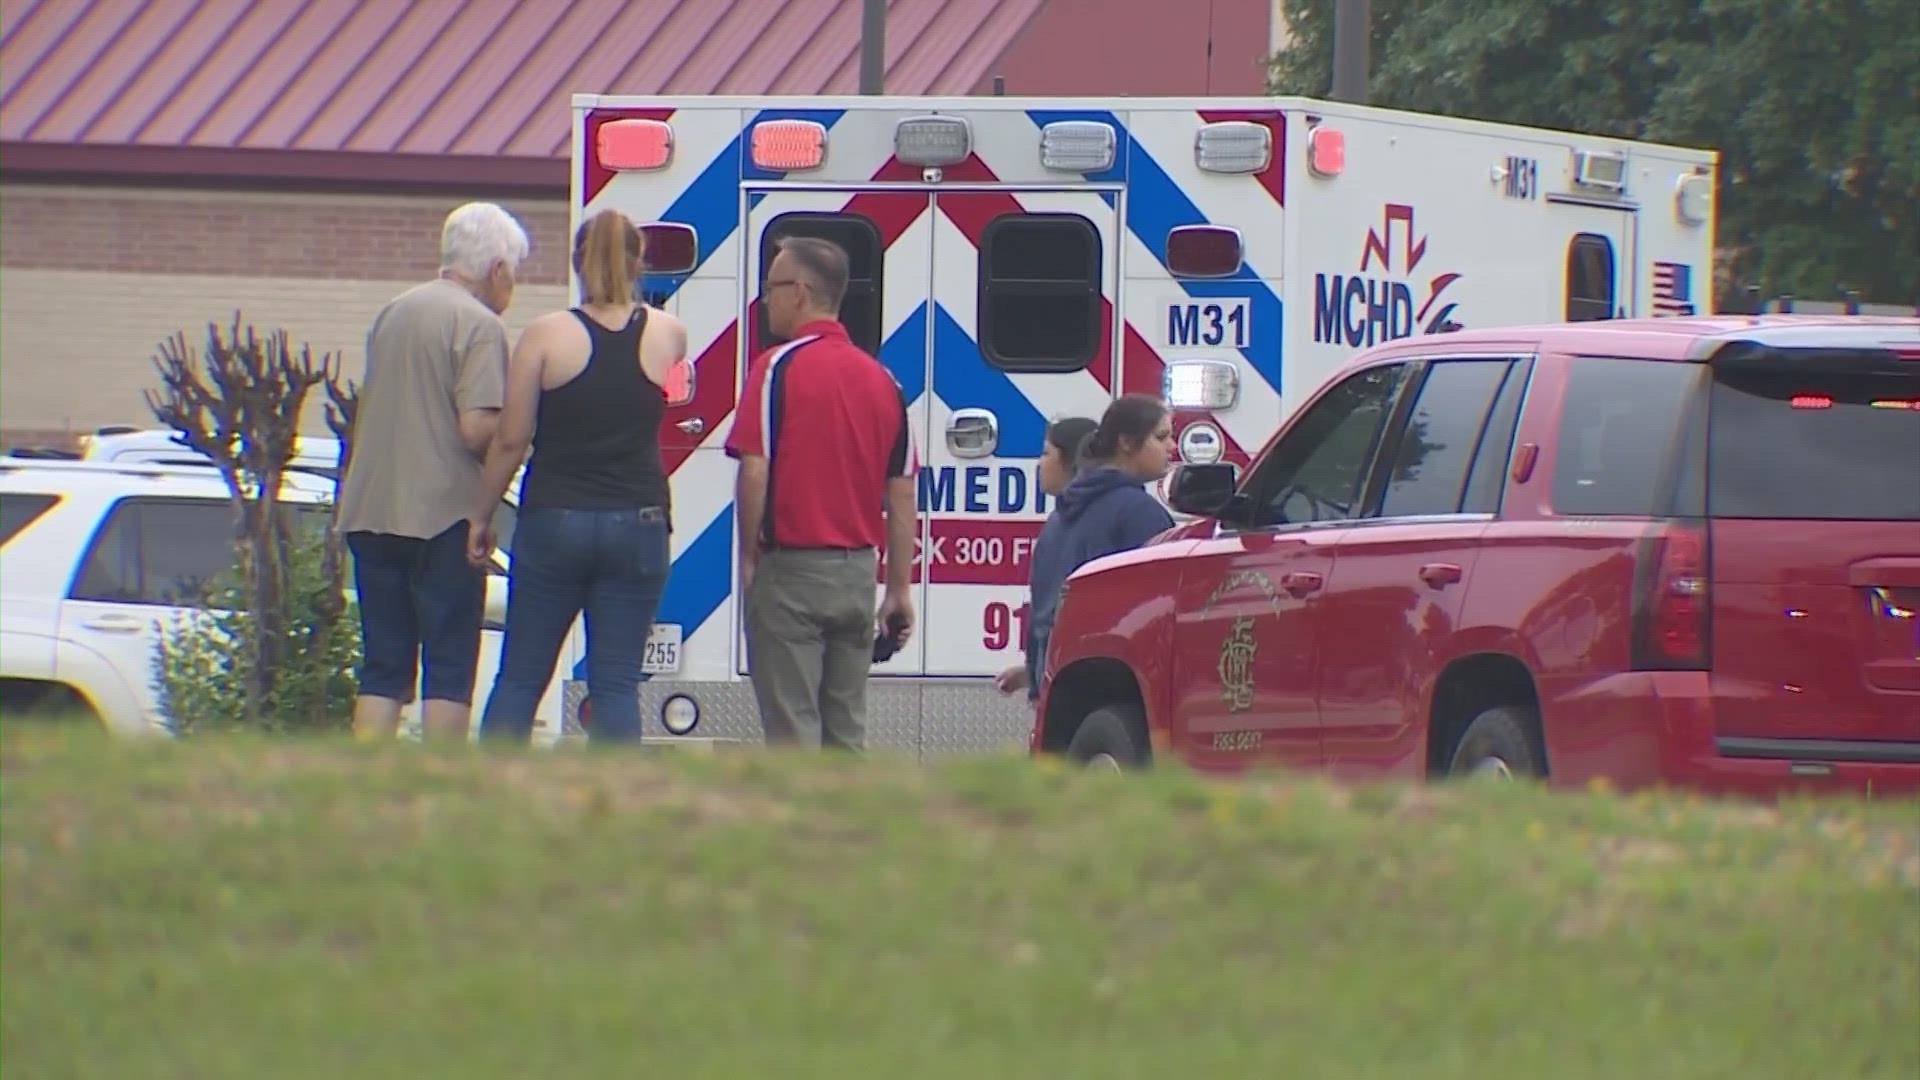 The Caney Creek fire chief said the students were taken to the hospital after reporting symptoms of headaches.